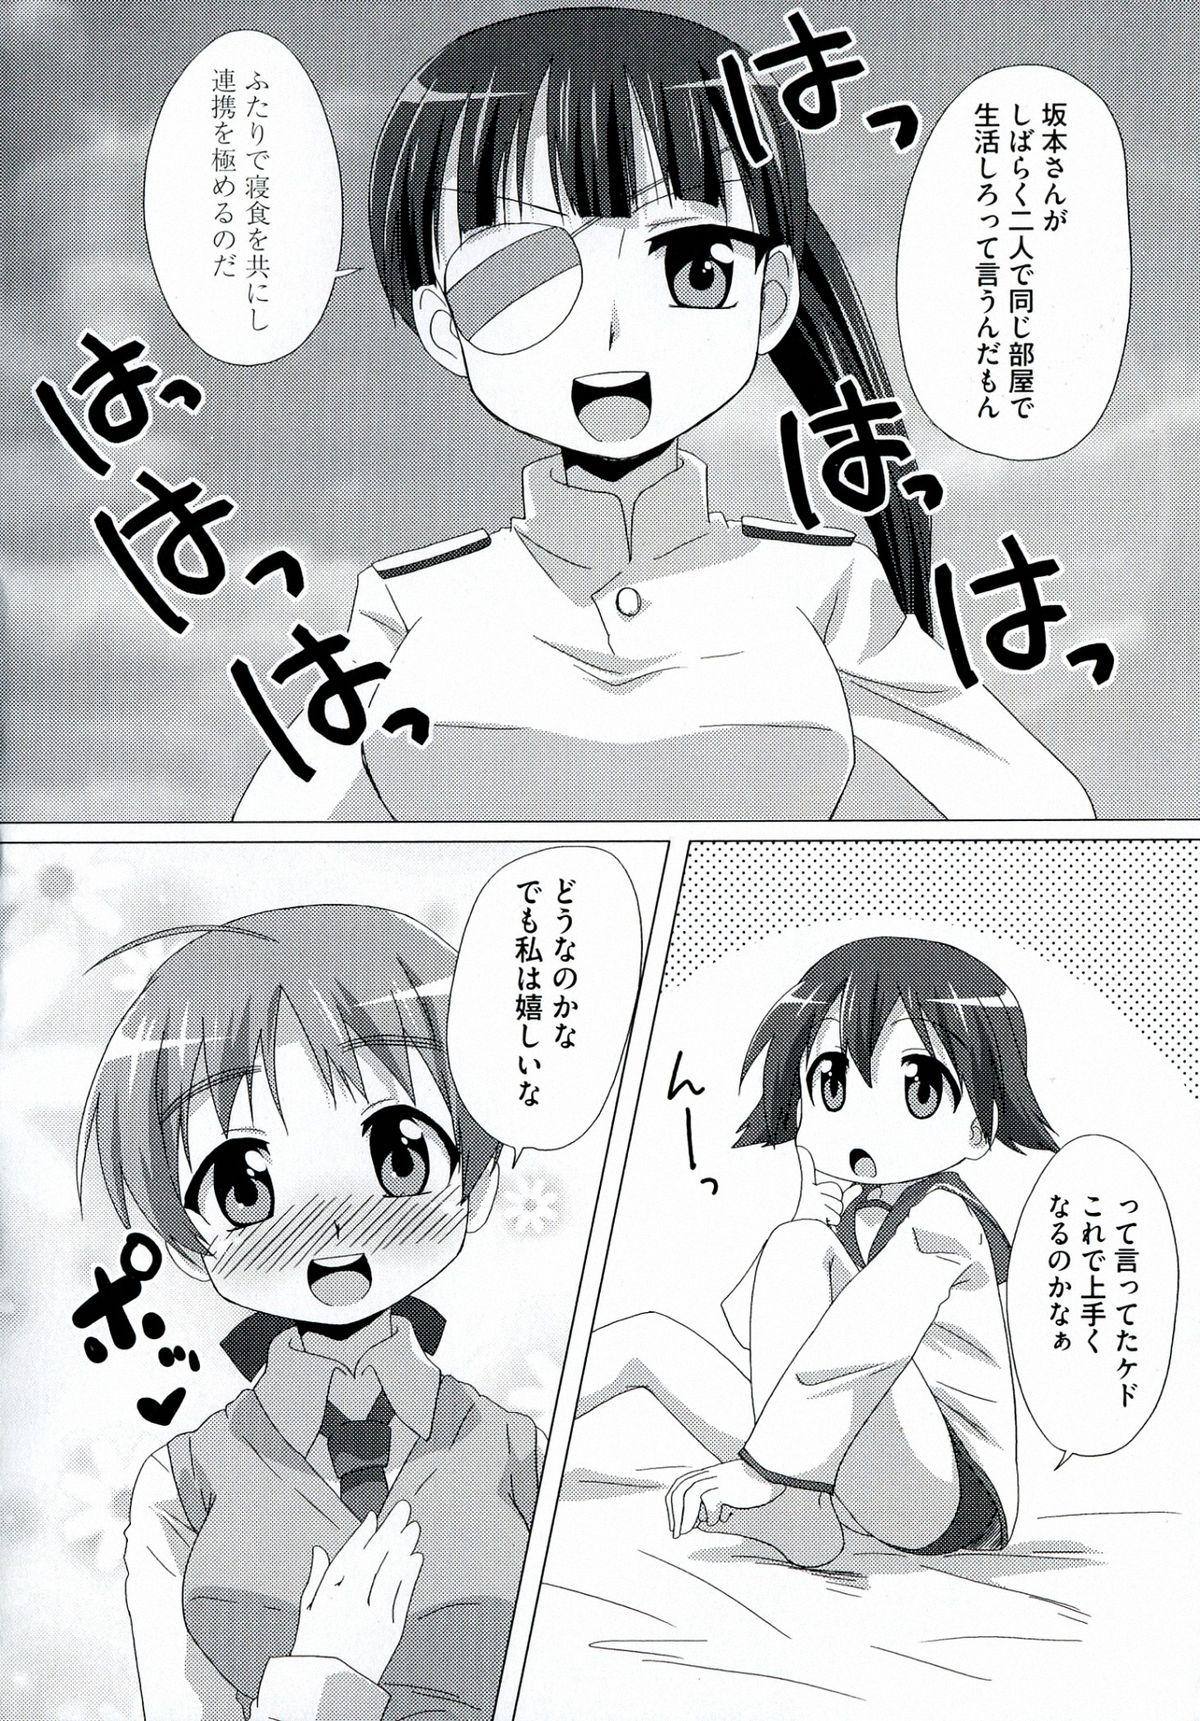 Namorada 501 no Witches - Strike witches Bulge - Page 6